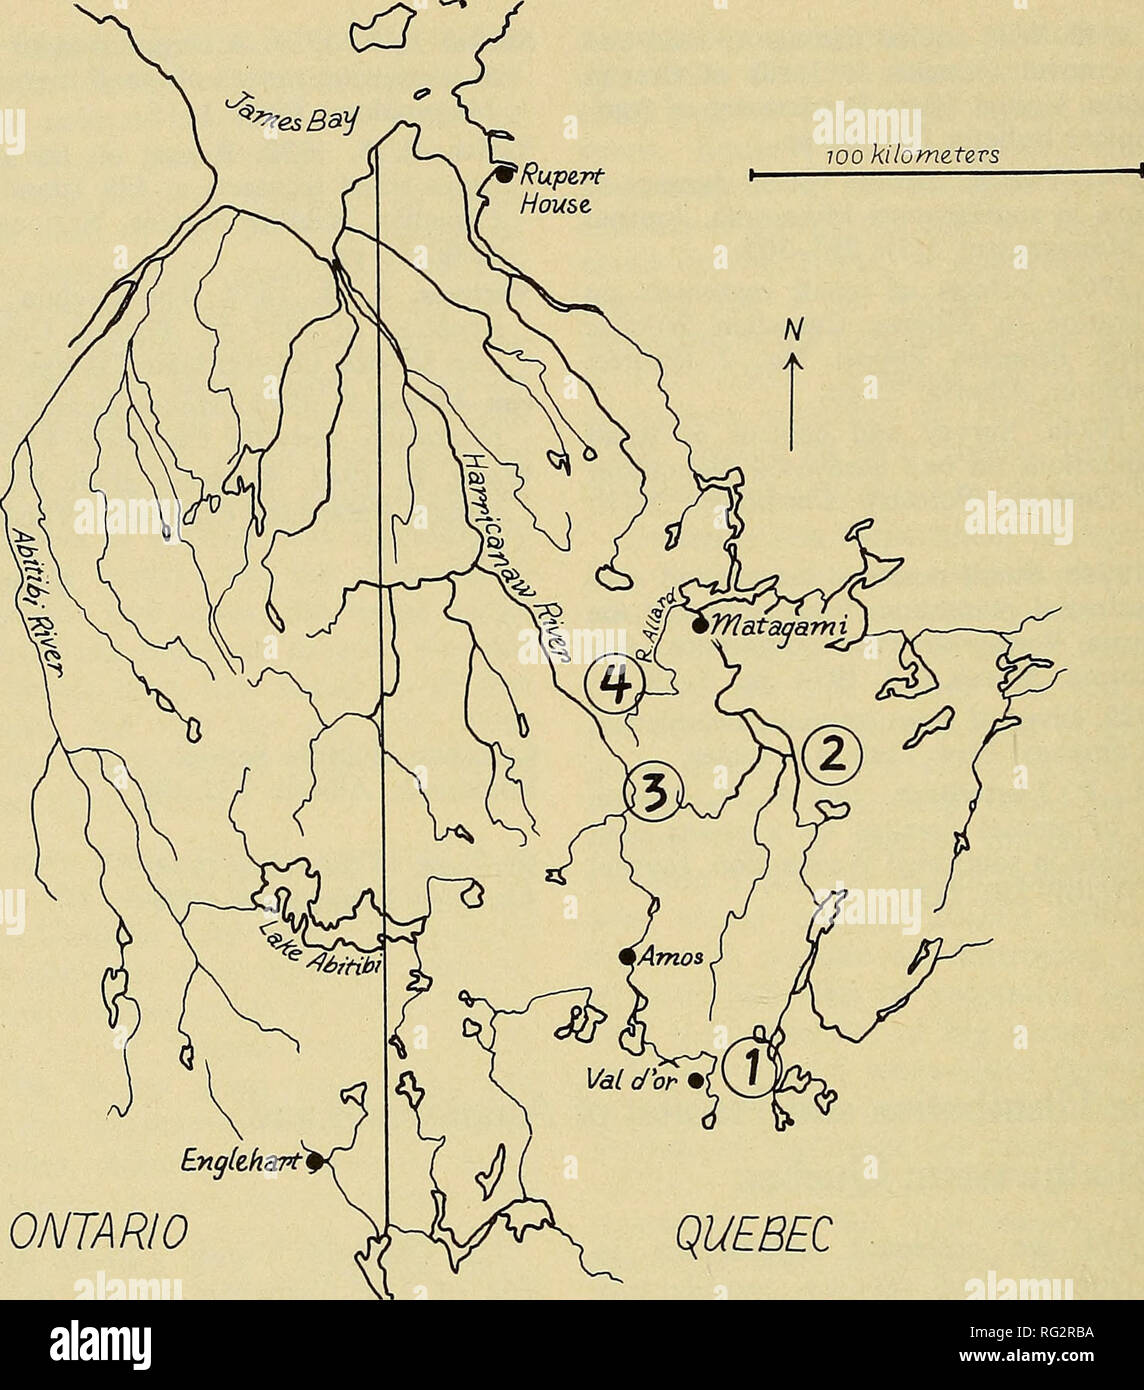 . The Canadian field-naturalist. 58 The Canadian Field-Naturalist Vol. 89. ONTARIO Figure 1. Map showing some localities mentioned in the text. 1 = Louvicourt Camp, 2 = Lac Cameron Camp, 3 = Chaste Township Camp, 4 = Douay Township Camp. Species Accounts Blue-spotted Salamander. {Ambystoma la- ter ale). Abundant at all camps, and taken at several other localities. Most were taken in min- now traps in roadside ditches or ponds, adjacent to fairly mature spruce or deciduous forests; we took a few under logs in such habitats, and found many crossing the road a few kilometers south of the Douay To Stock Photo